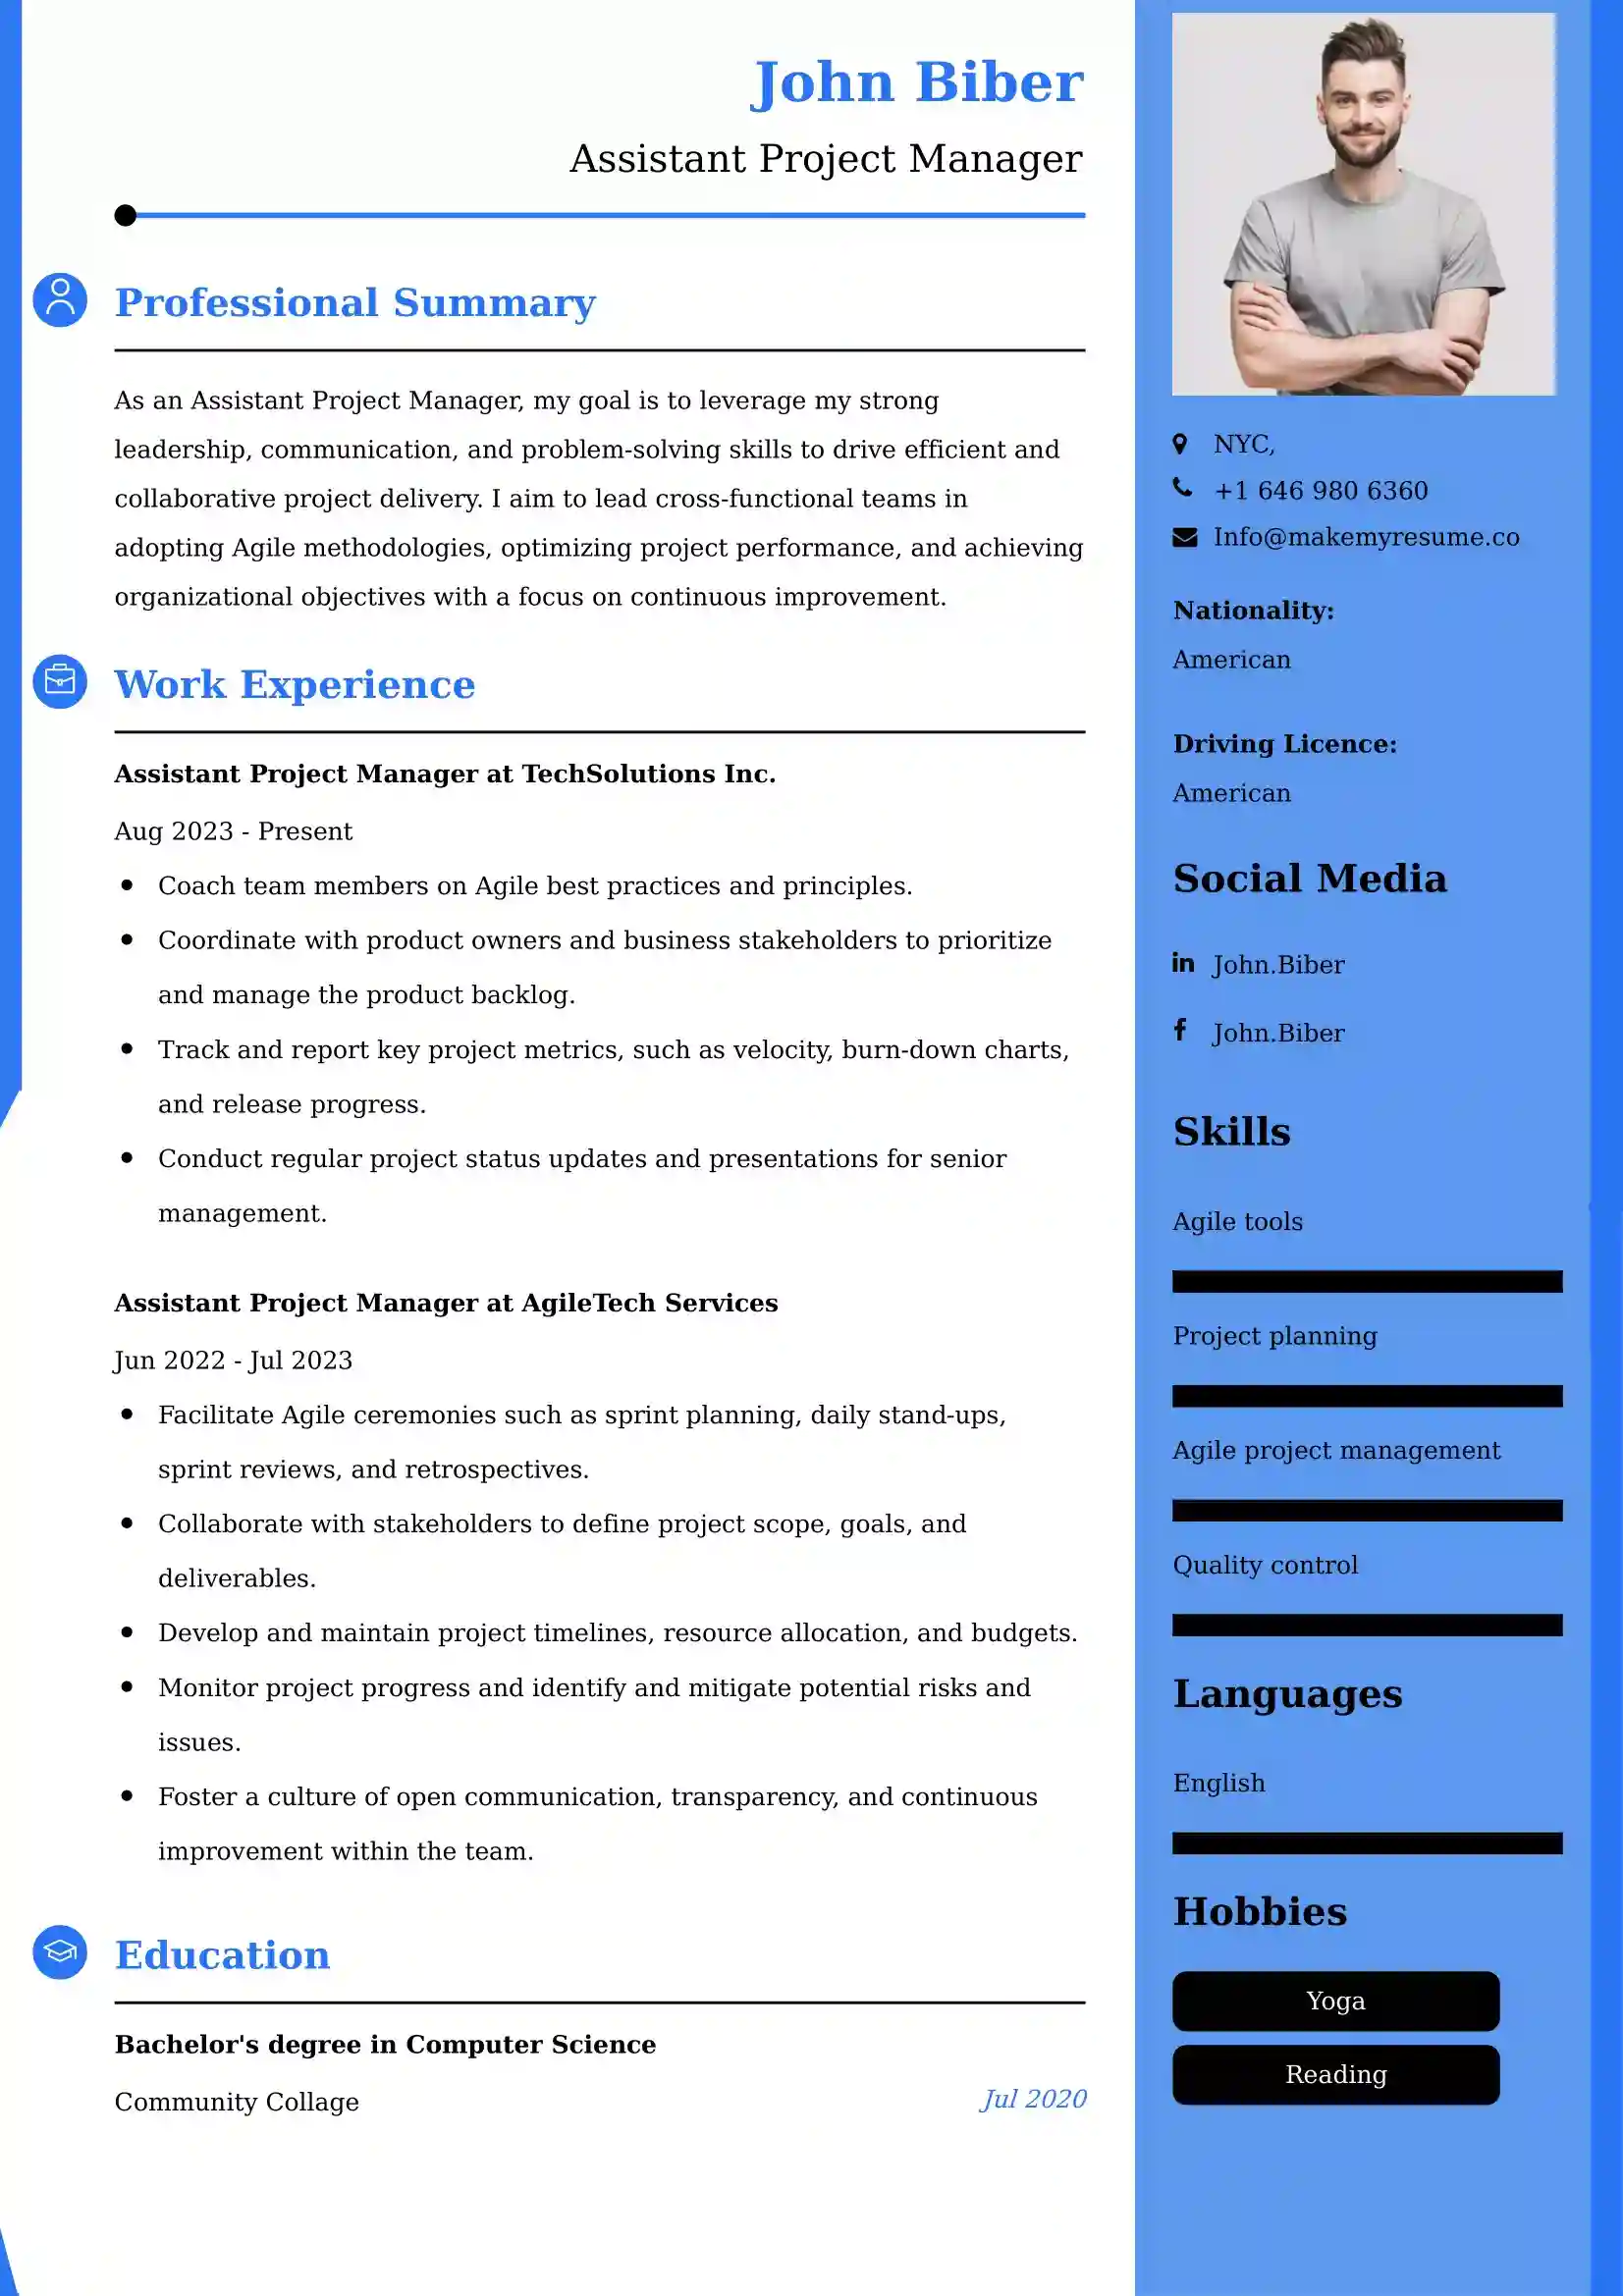 Assistant Project Manager Resume Examples for UK Jobs - Tips and Guide